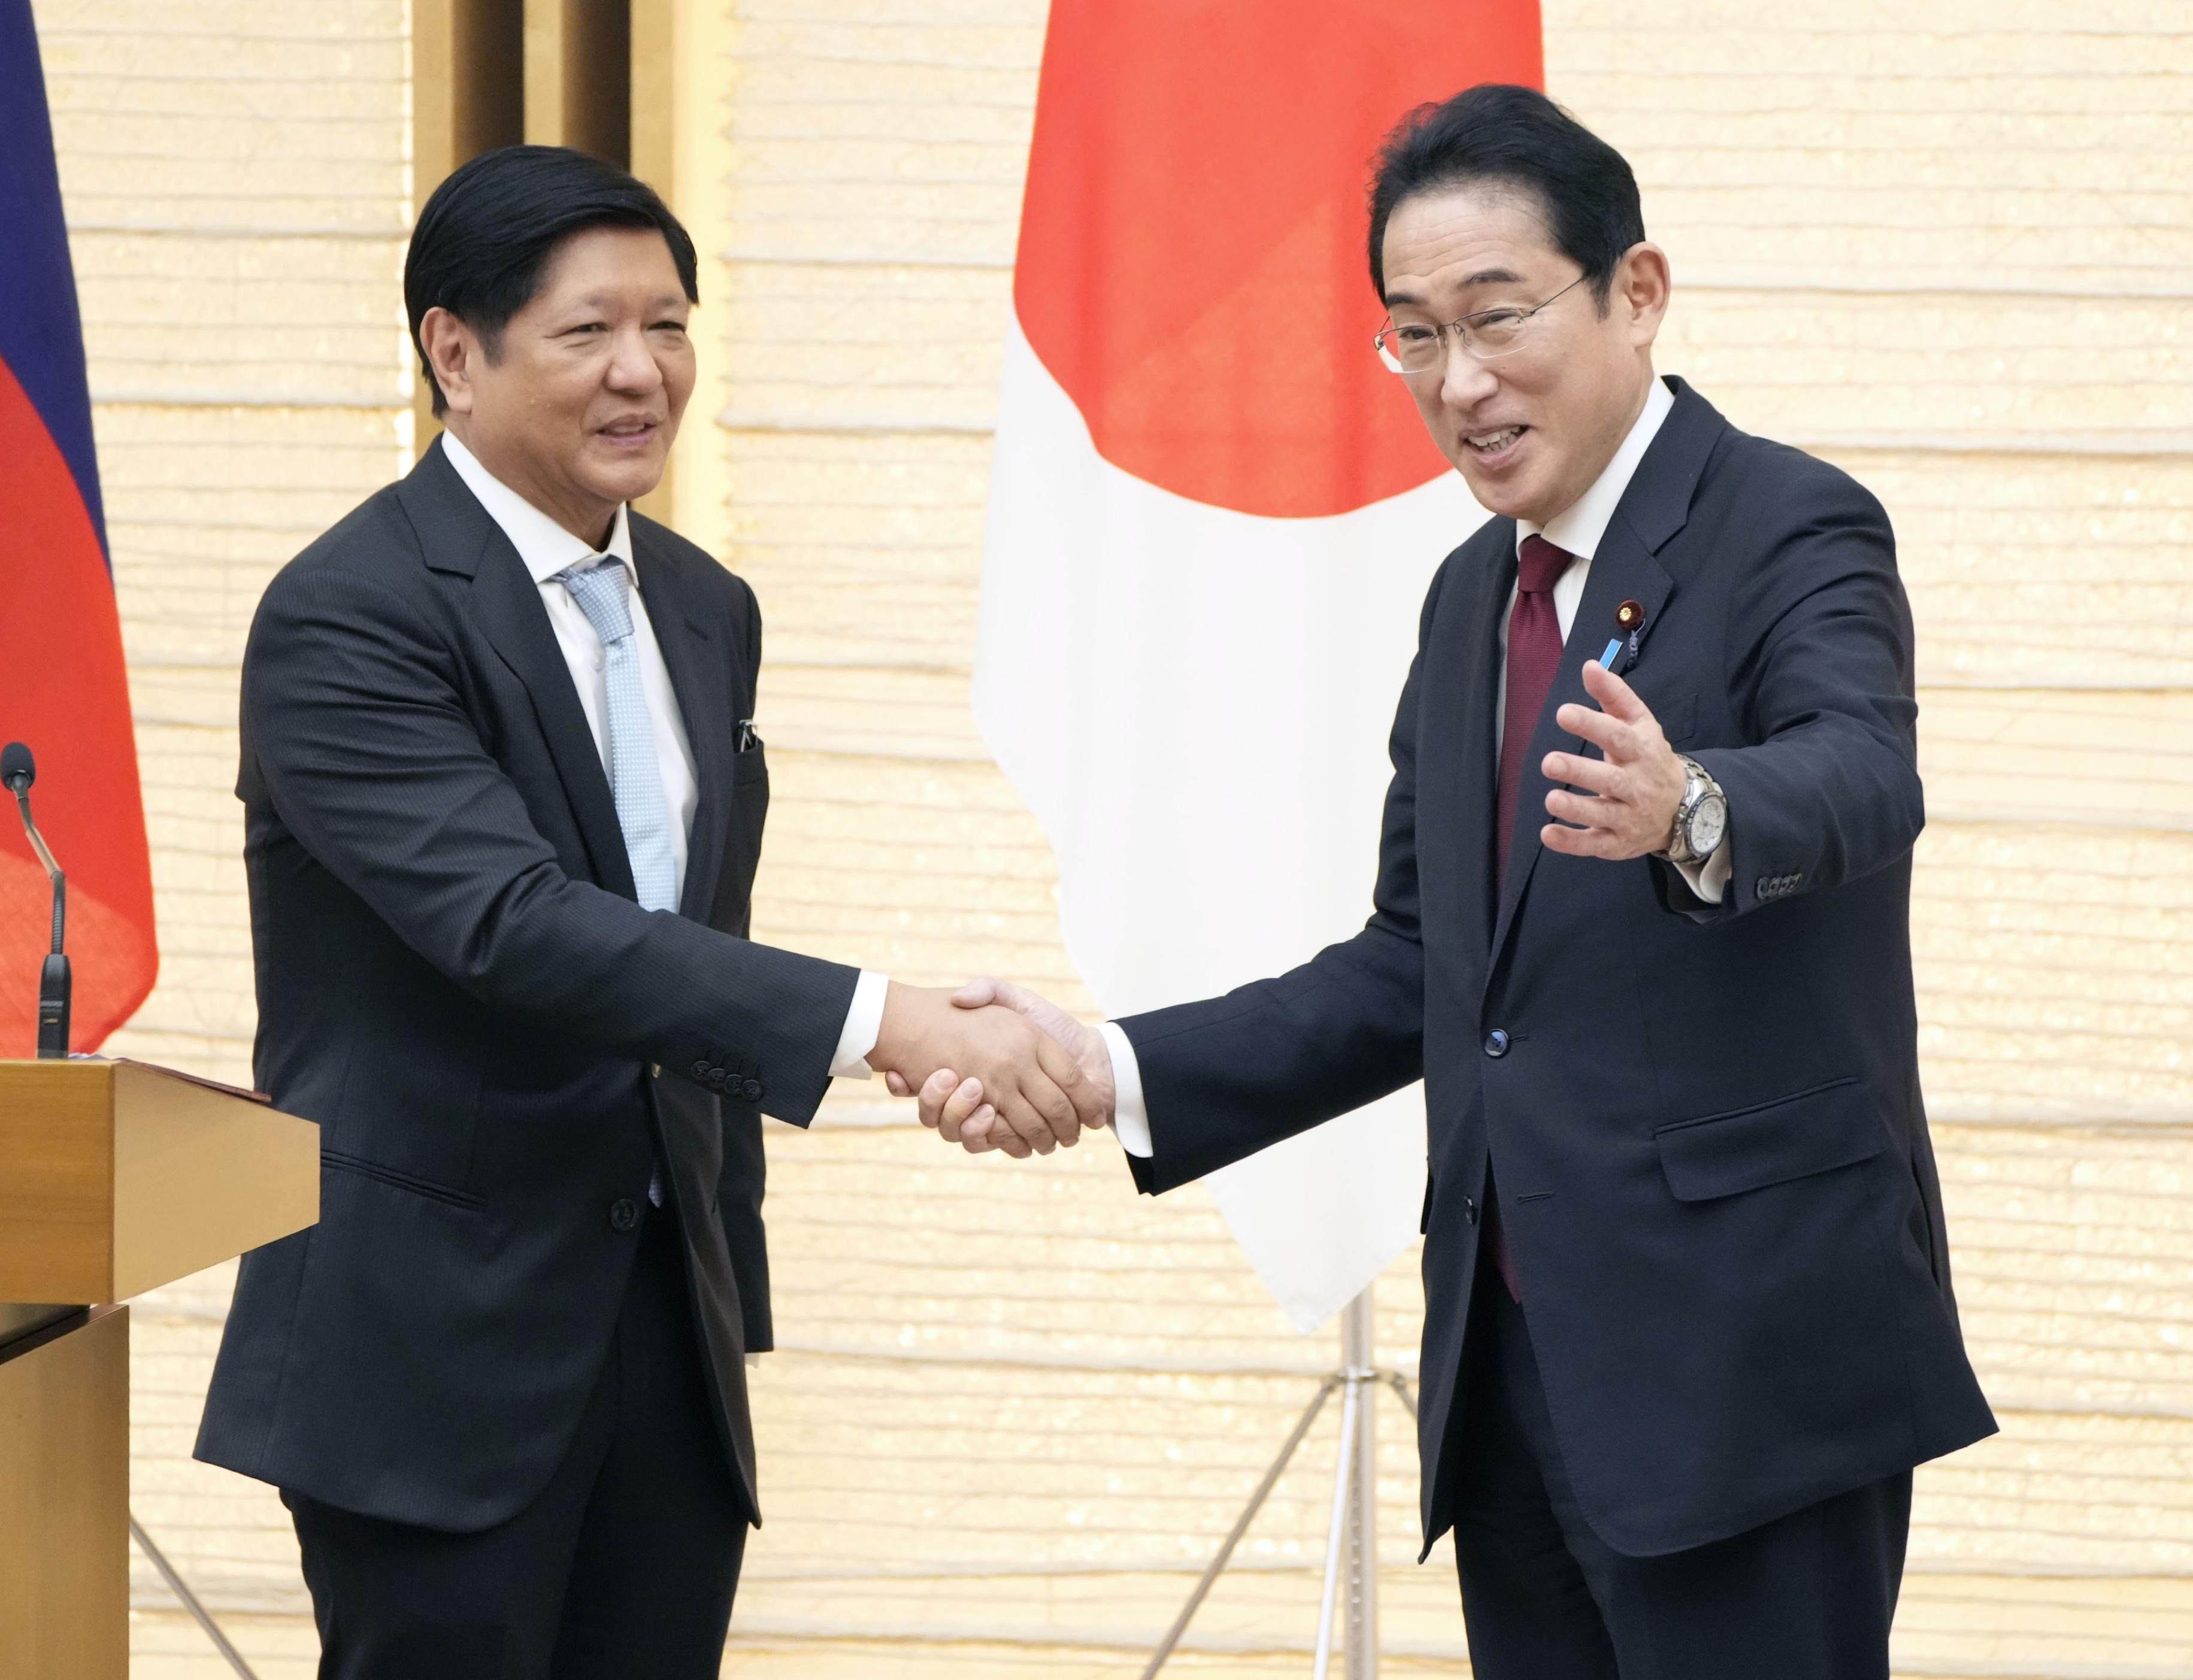 Japanese Prime Minister Fumio Kishida with Philippine President Ferdinand Marcos Jr. following a joint press conference in Tokyo on February 9, 2023. Photo: Kyodo